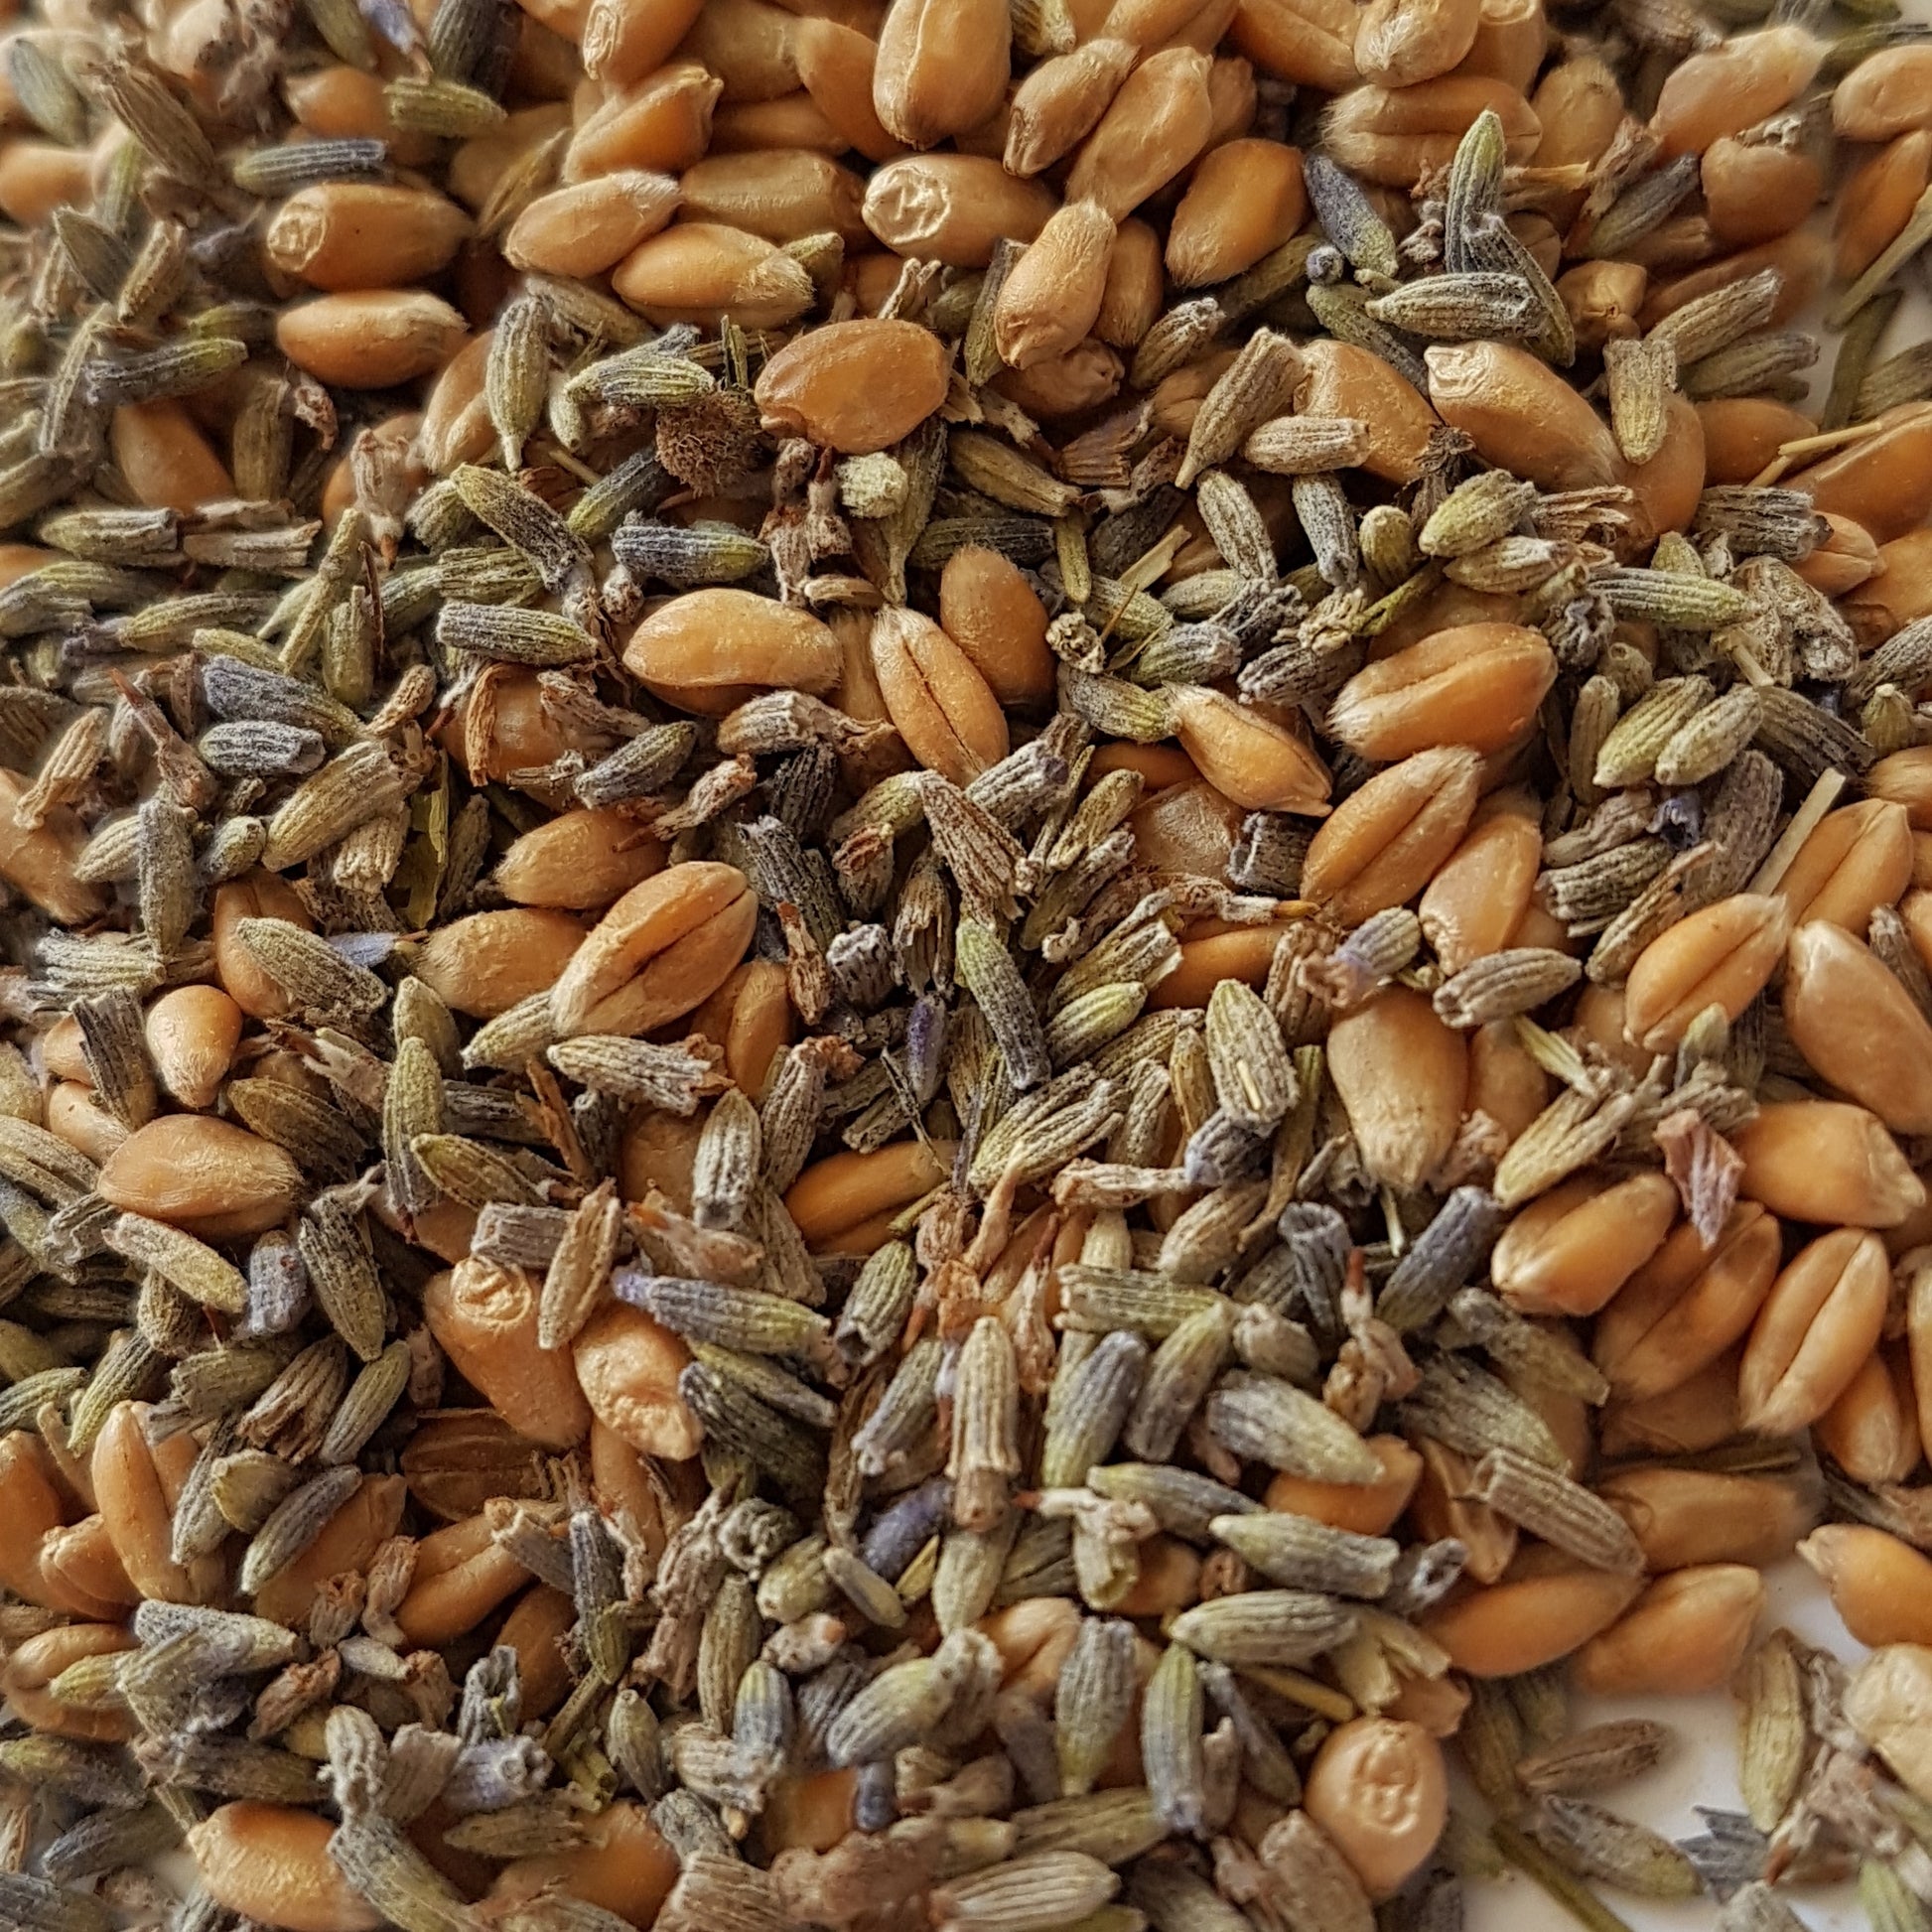 Whole wheat from Somerset and dried English lavender buds filling used for WheatBagHeaven wheat bags